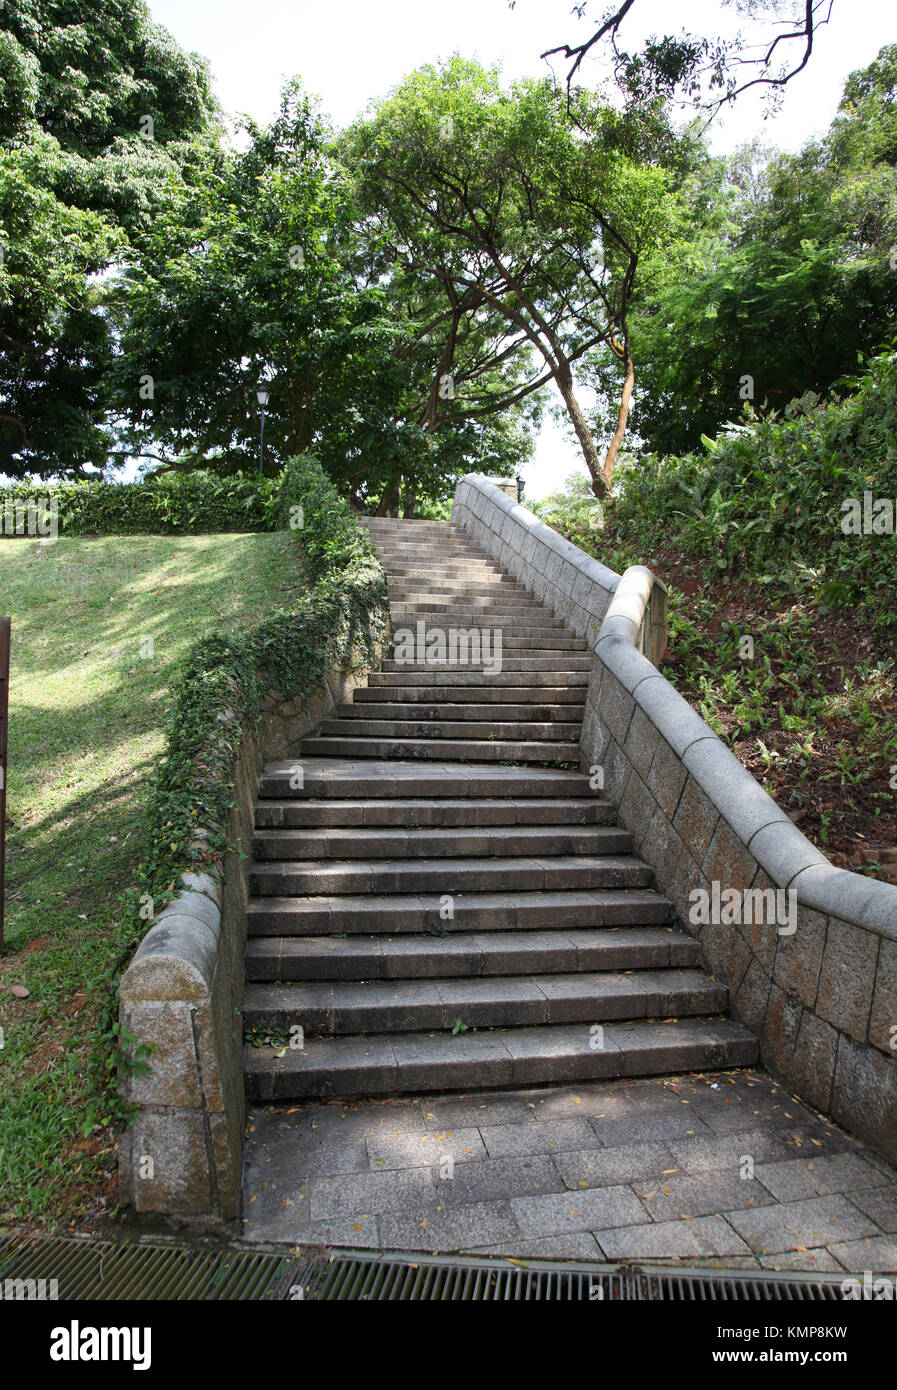 Stone stairs going up in a park or garden in Singapore Stock Photo